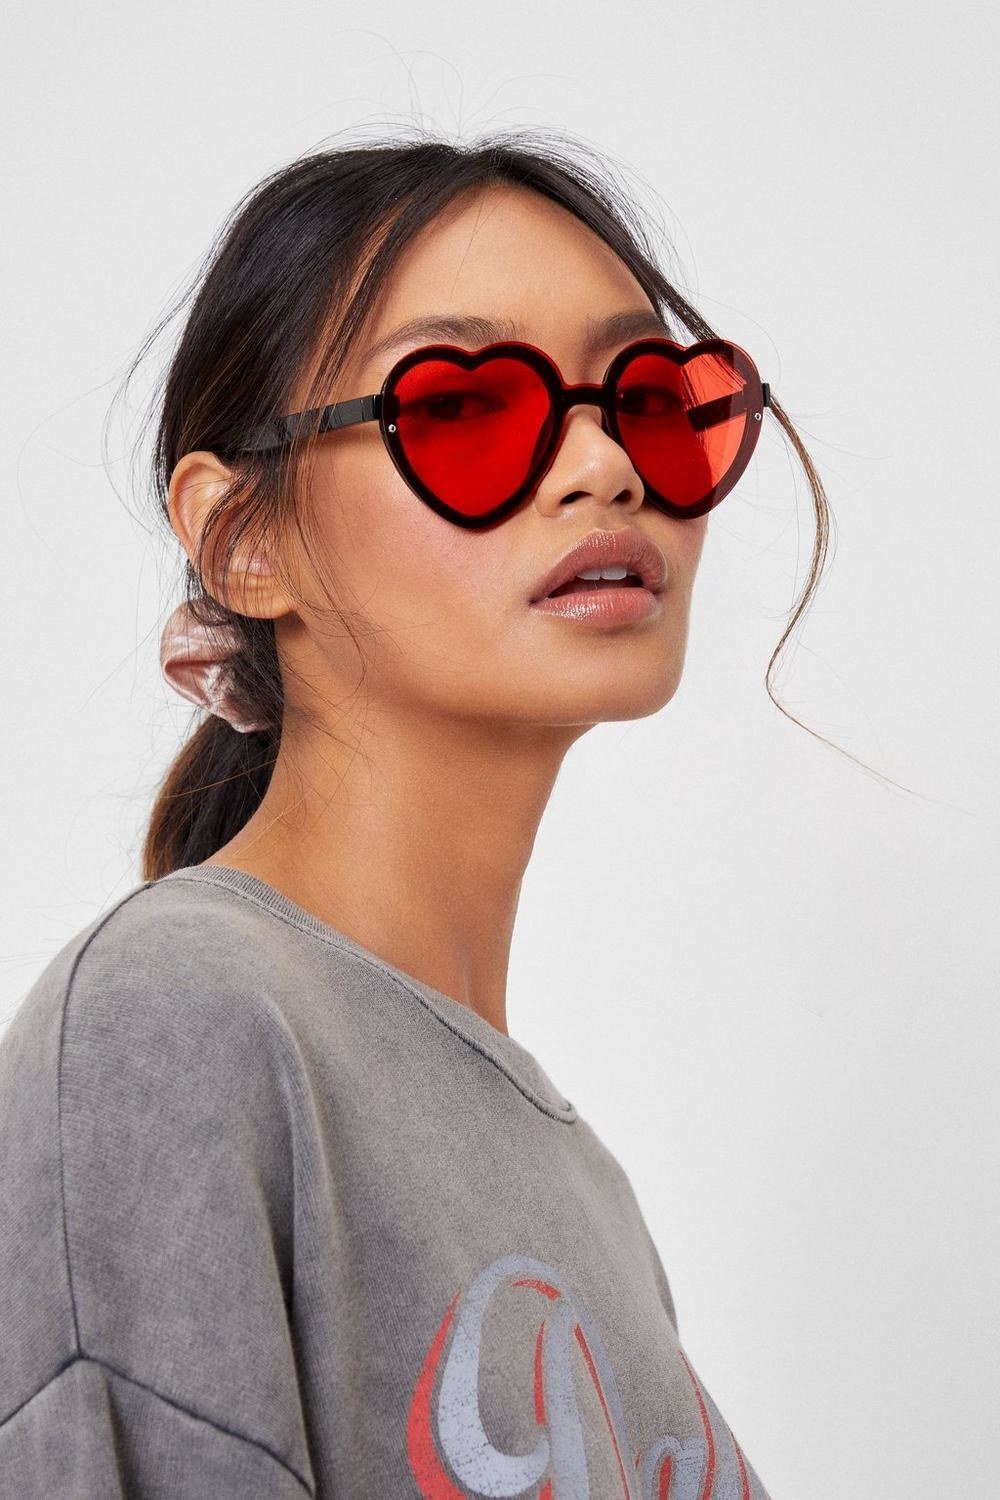 A person wearing large heart-shaped sunglasses